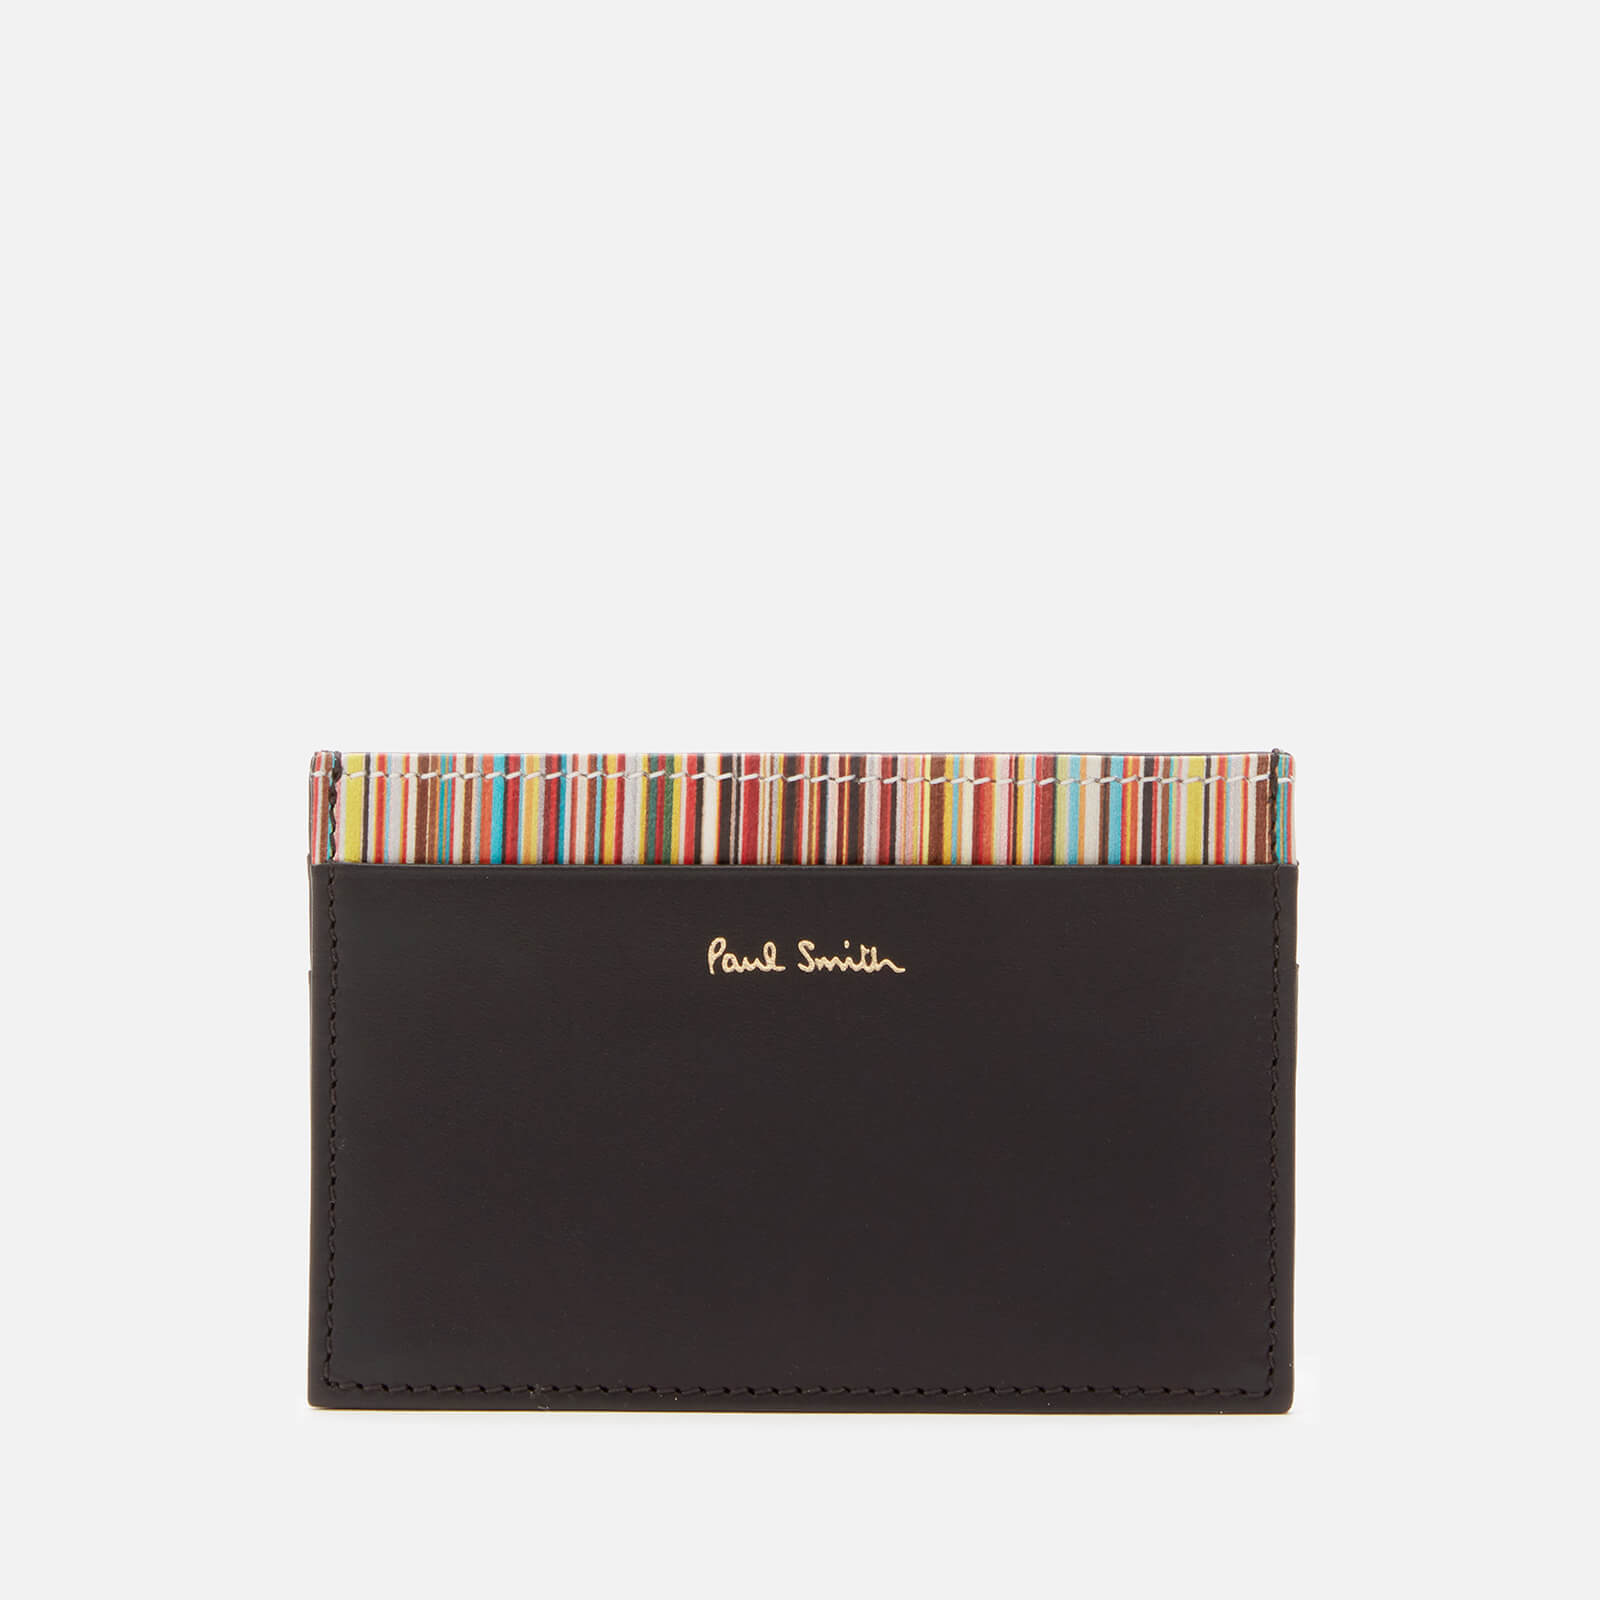 PS by Paul Smith Men's Signature Stripe Trim Leather Credit Card Holder - Black